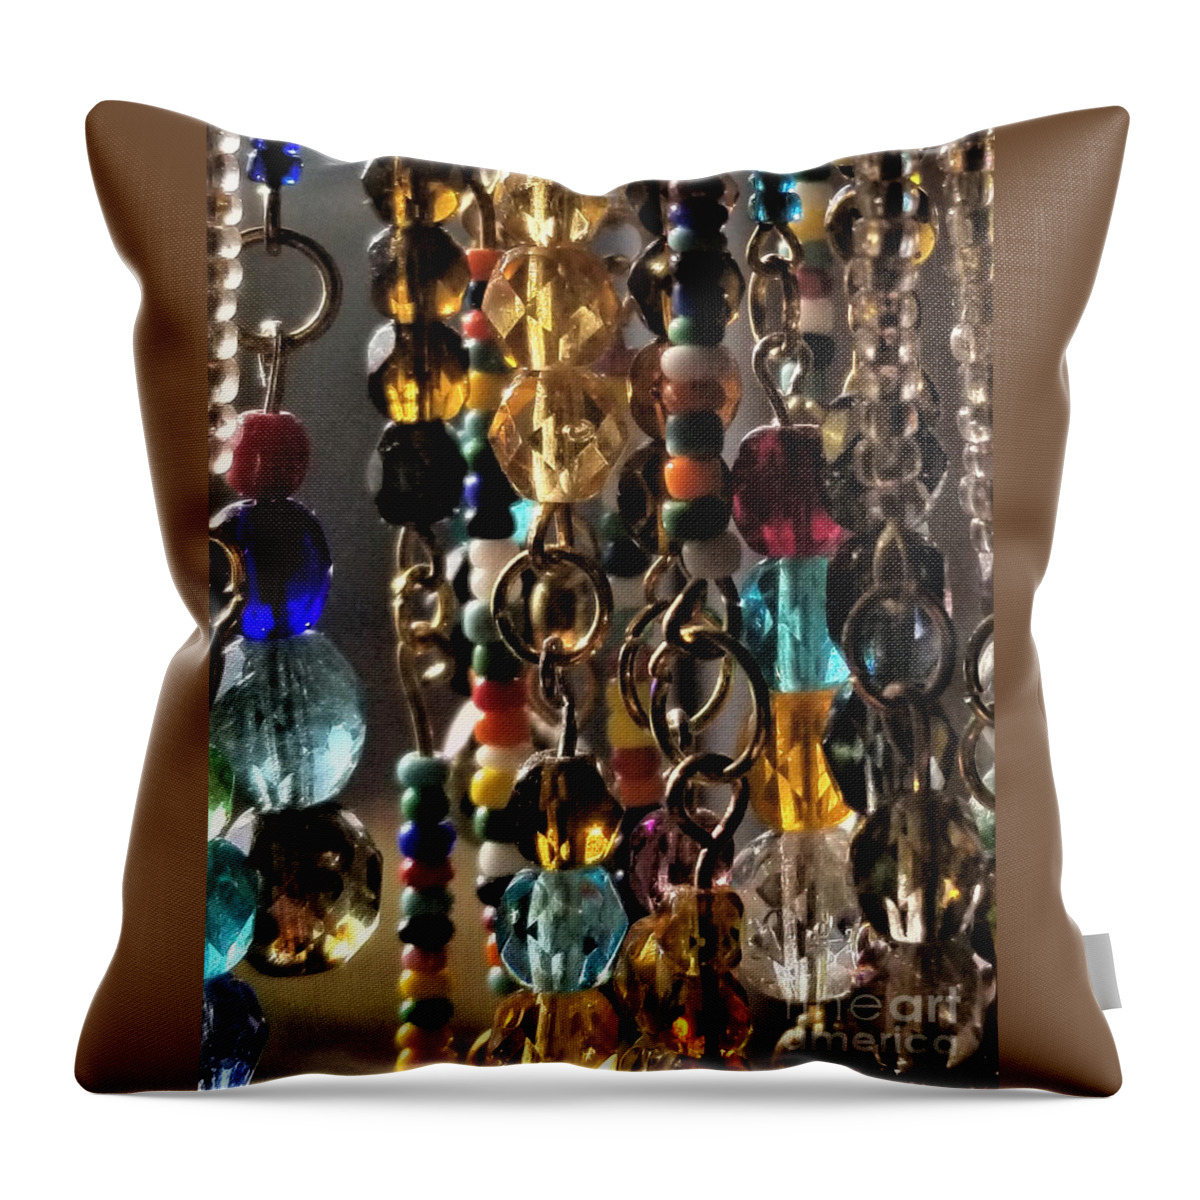 Beads Throw Pillow featuring the photograph Beads by Jackie Mueller-Jones